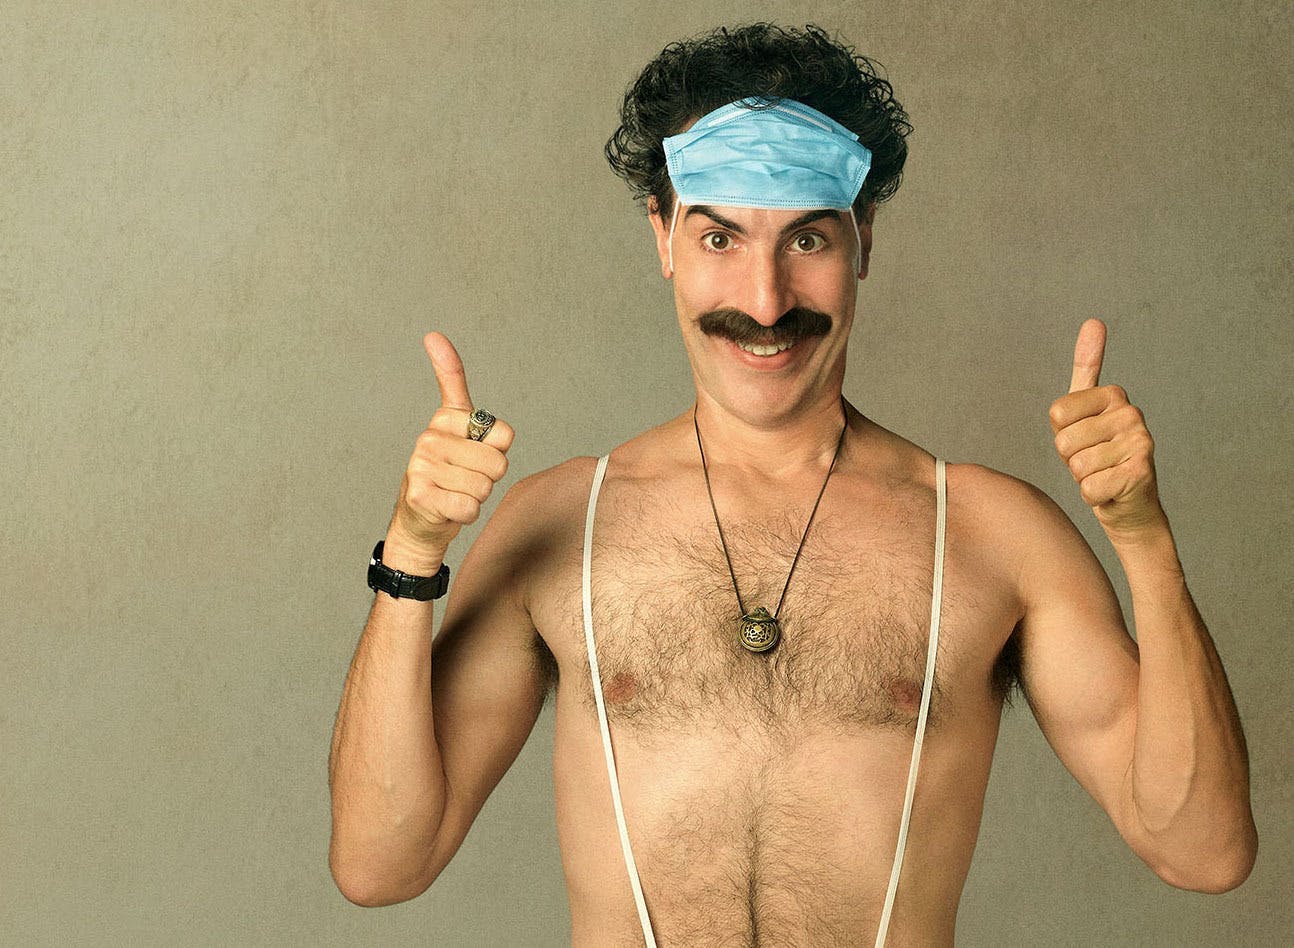 Who were the unwilling celebrity guests involved in Borat’s second movie? Let’s dive into those surprise celeb cameos.